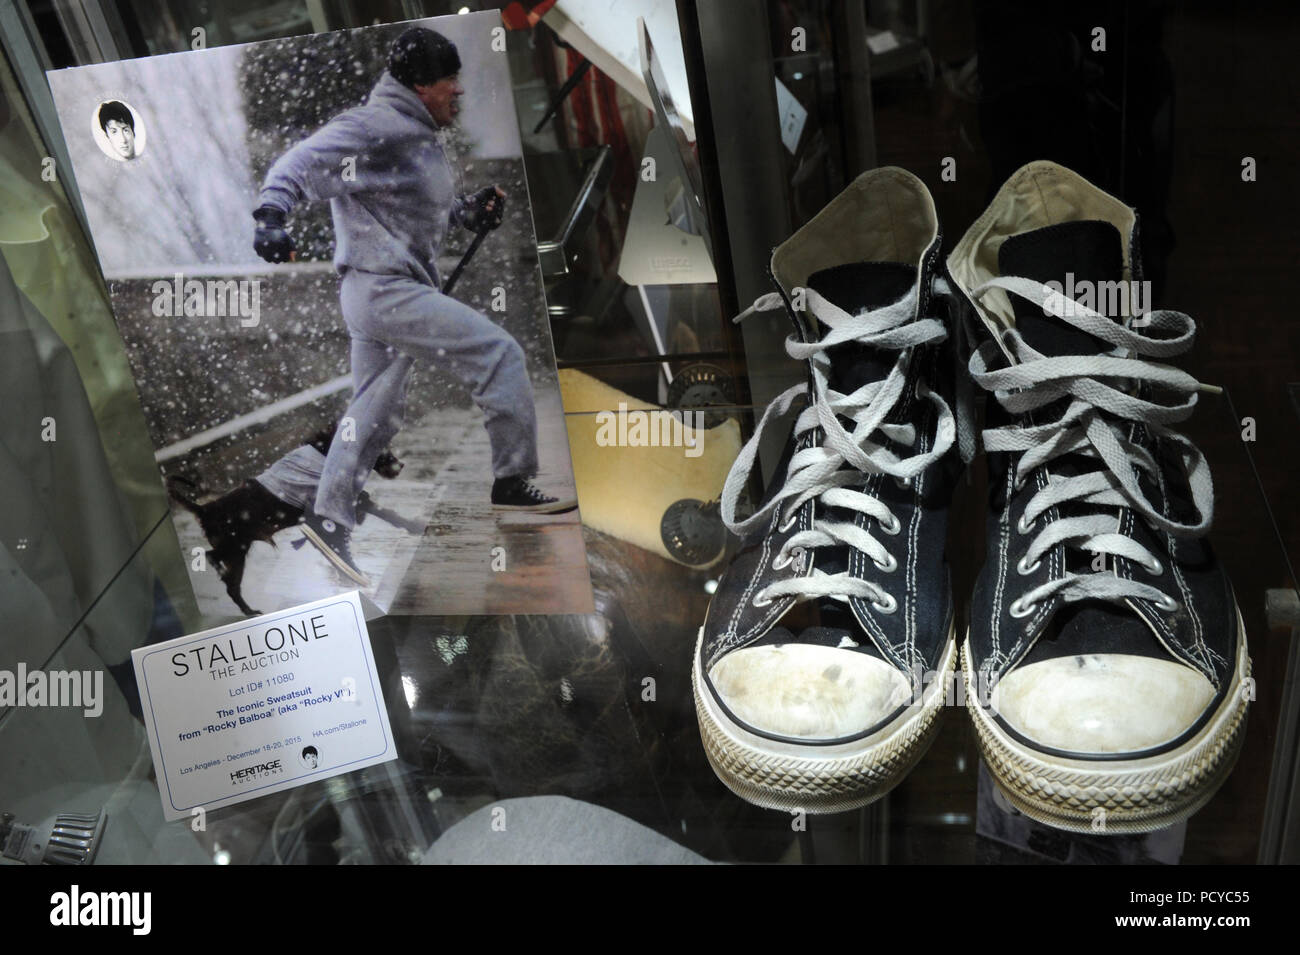 NEW YORK, NY - OCTOBER 21: A pair of shoes worn by actor Sylvester Stallone  in the film' Rocky VI' on display during a press preview of Heritage  Auctions upcoming auction of